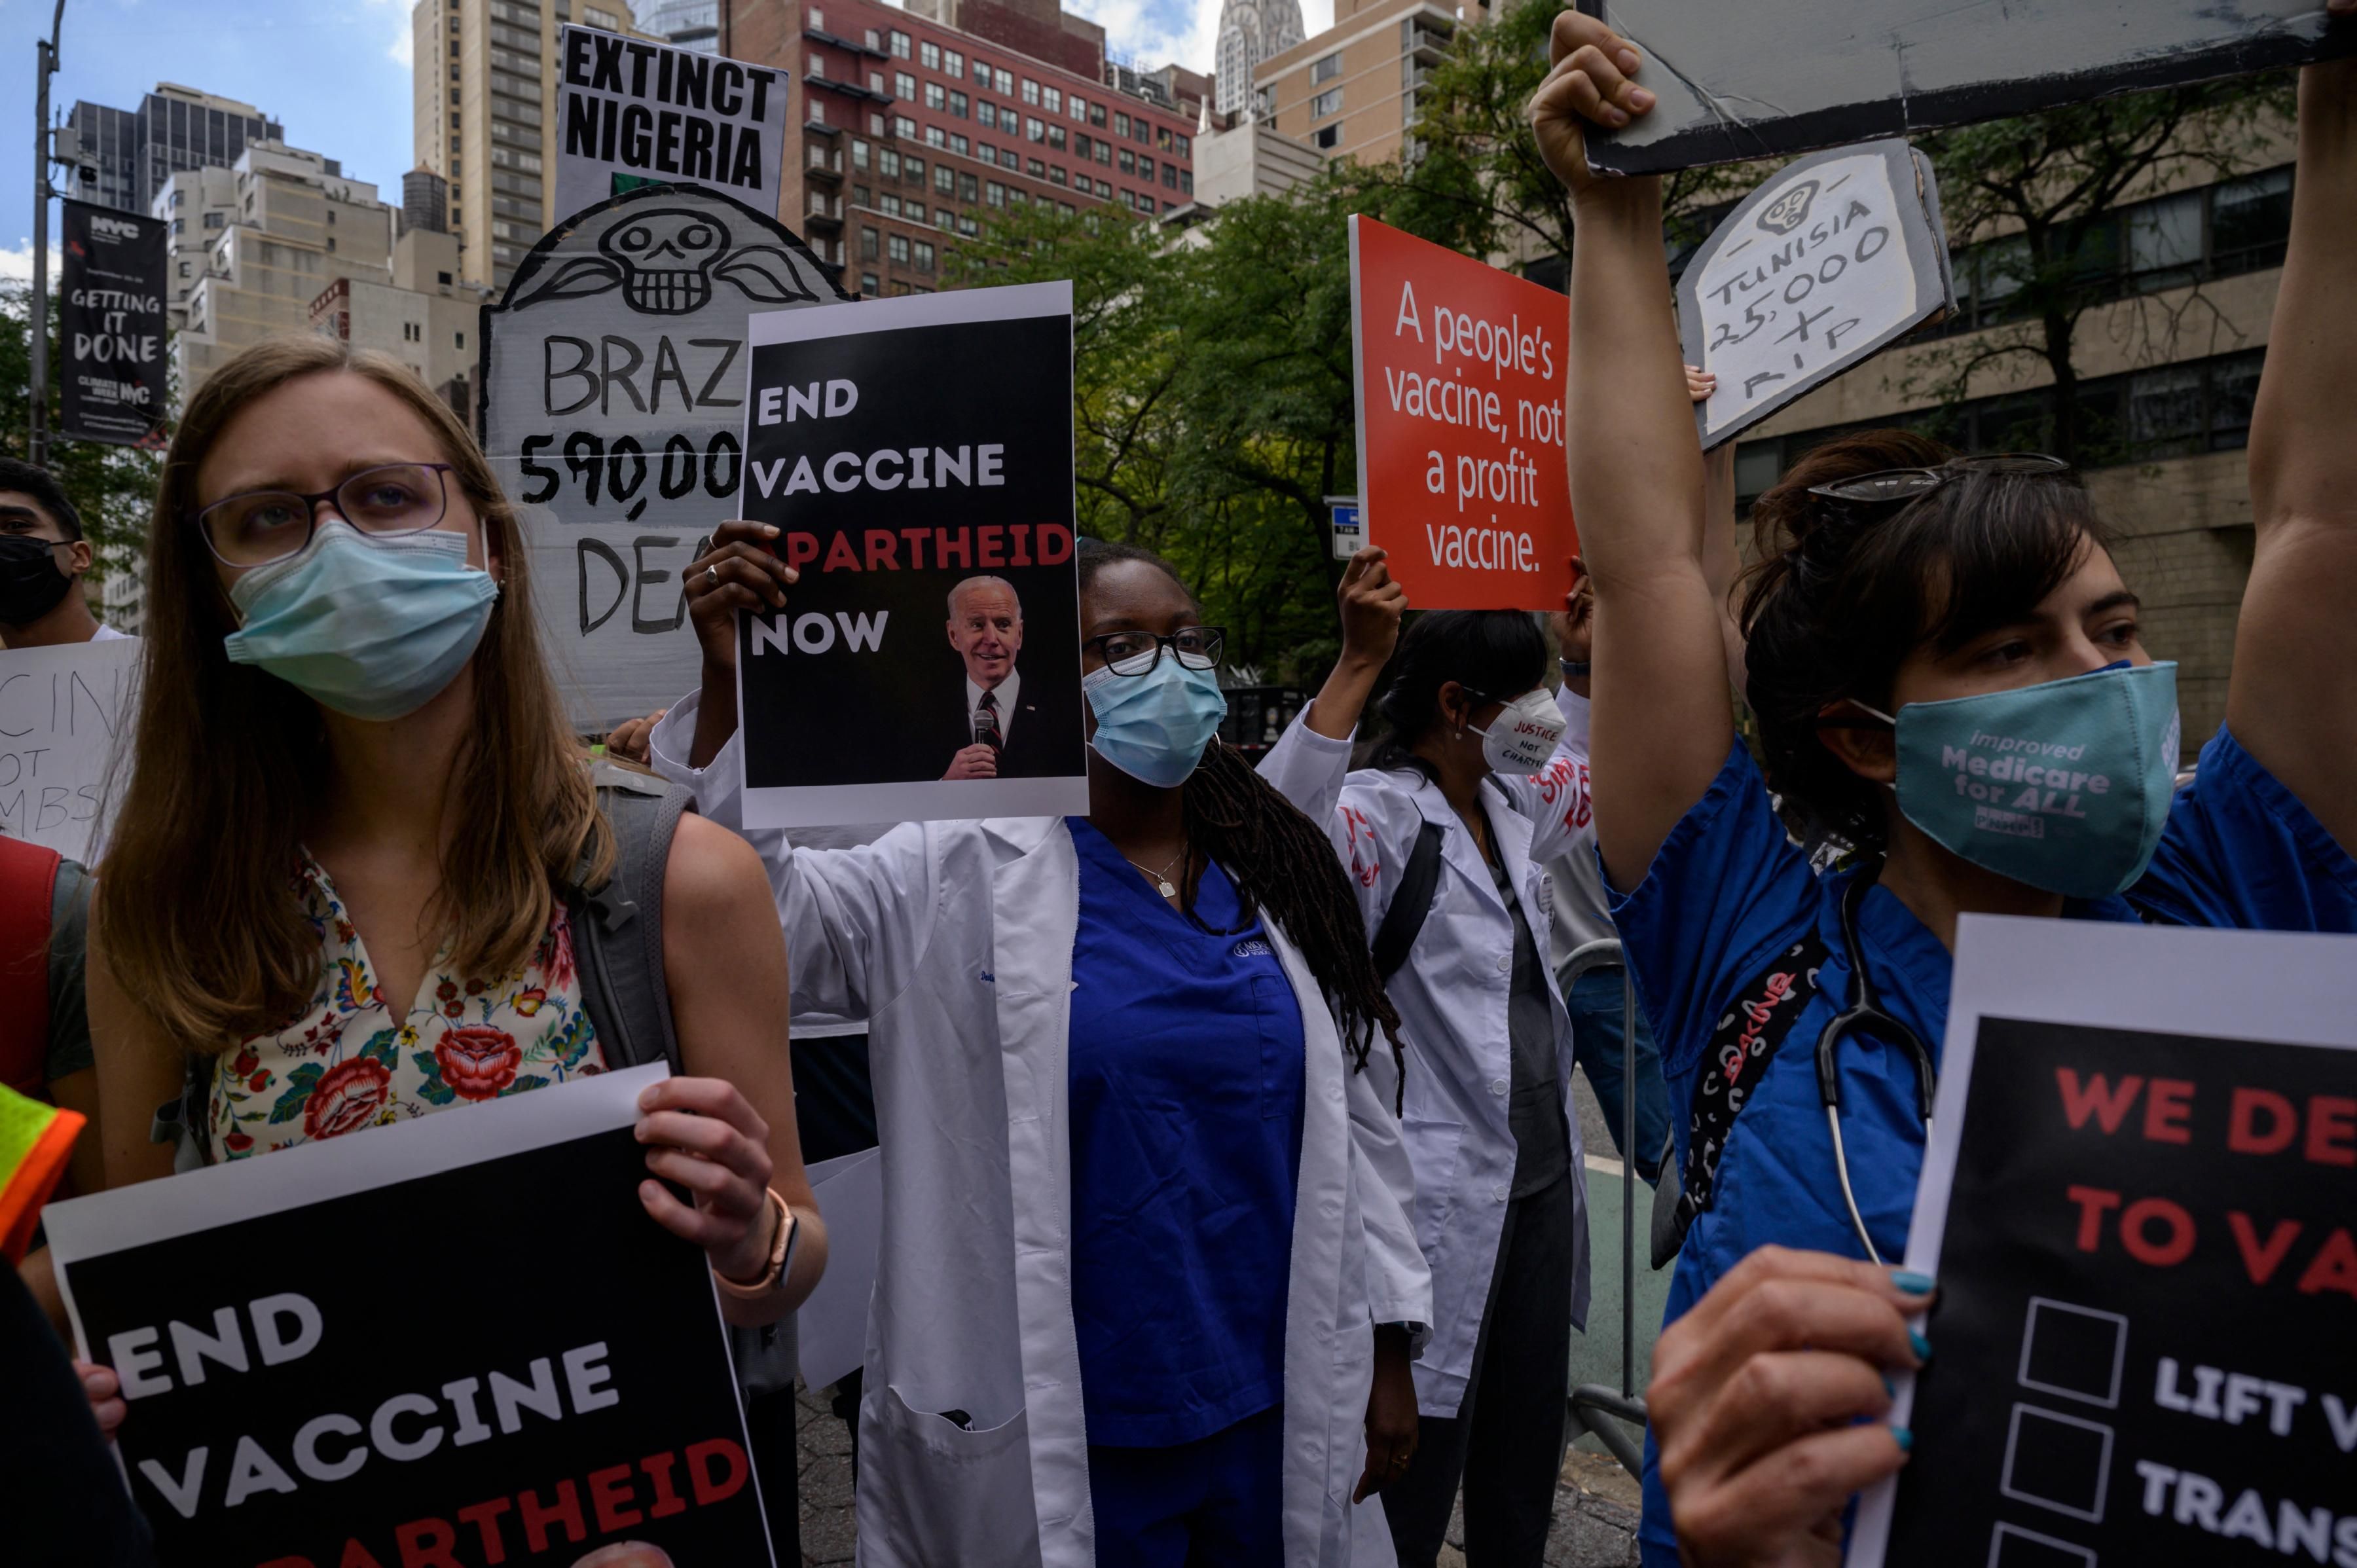 Protesters demand an end to vaccine apartheid